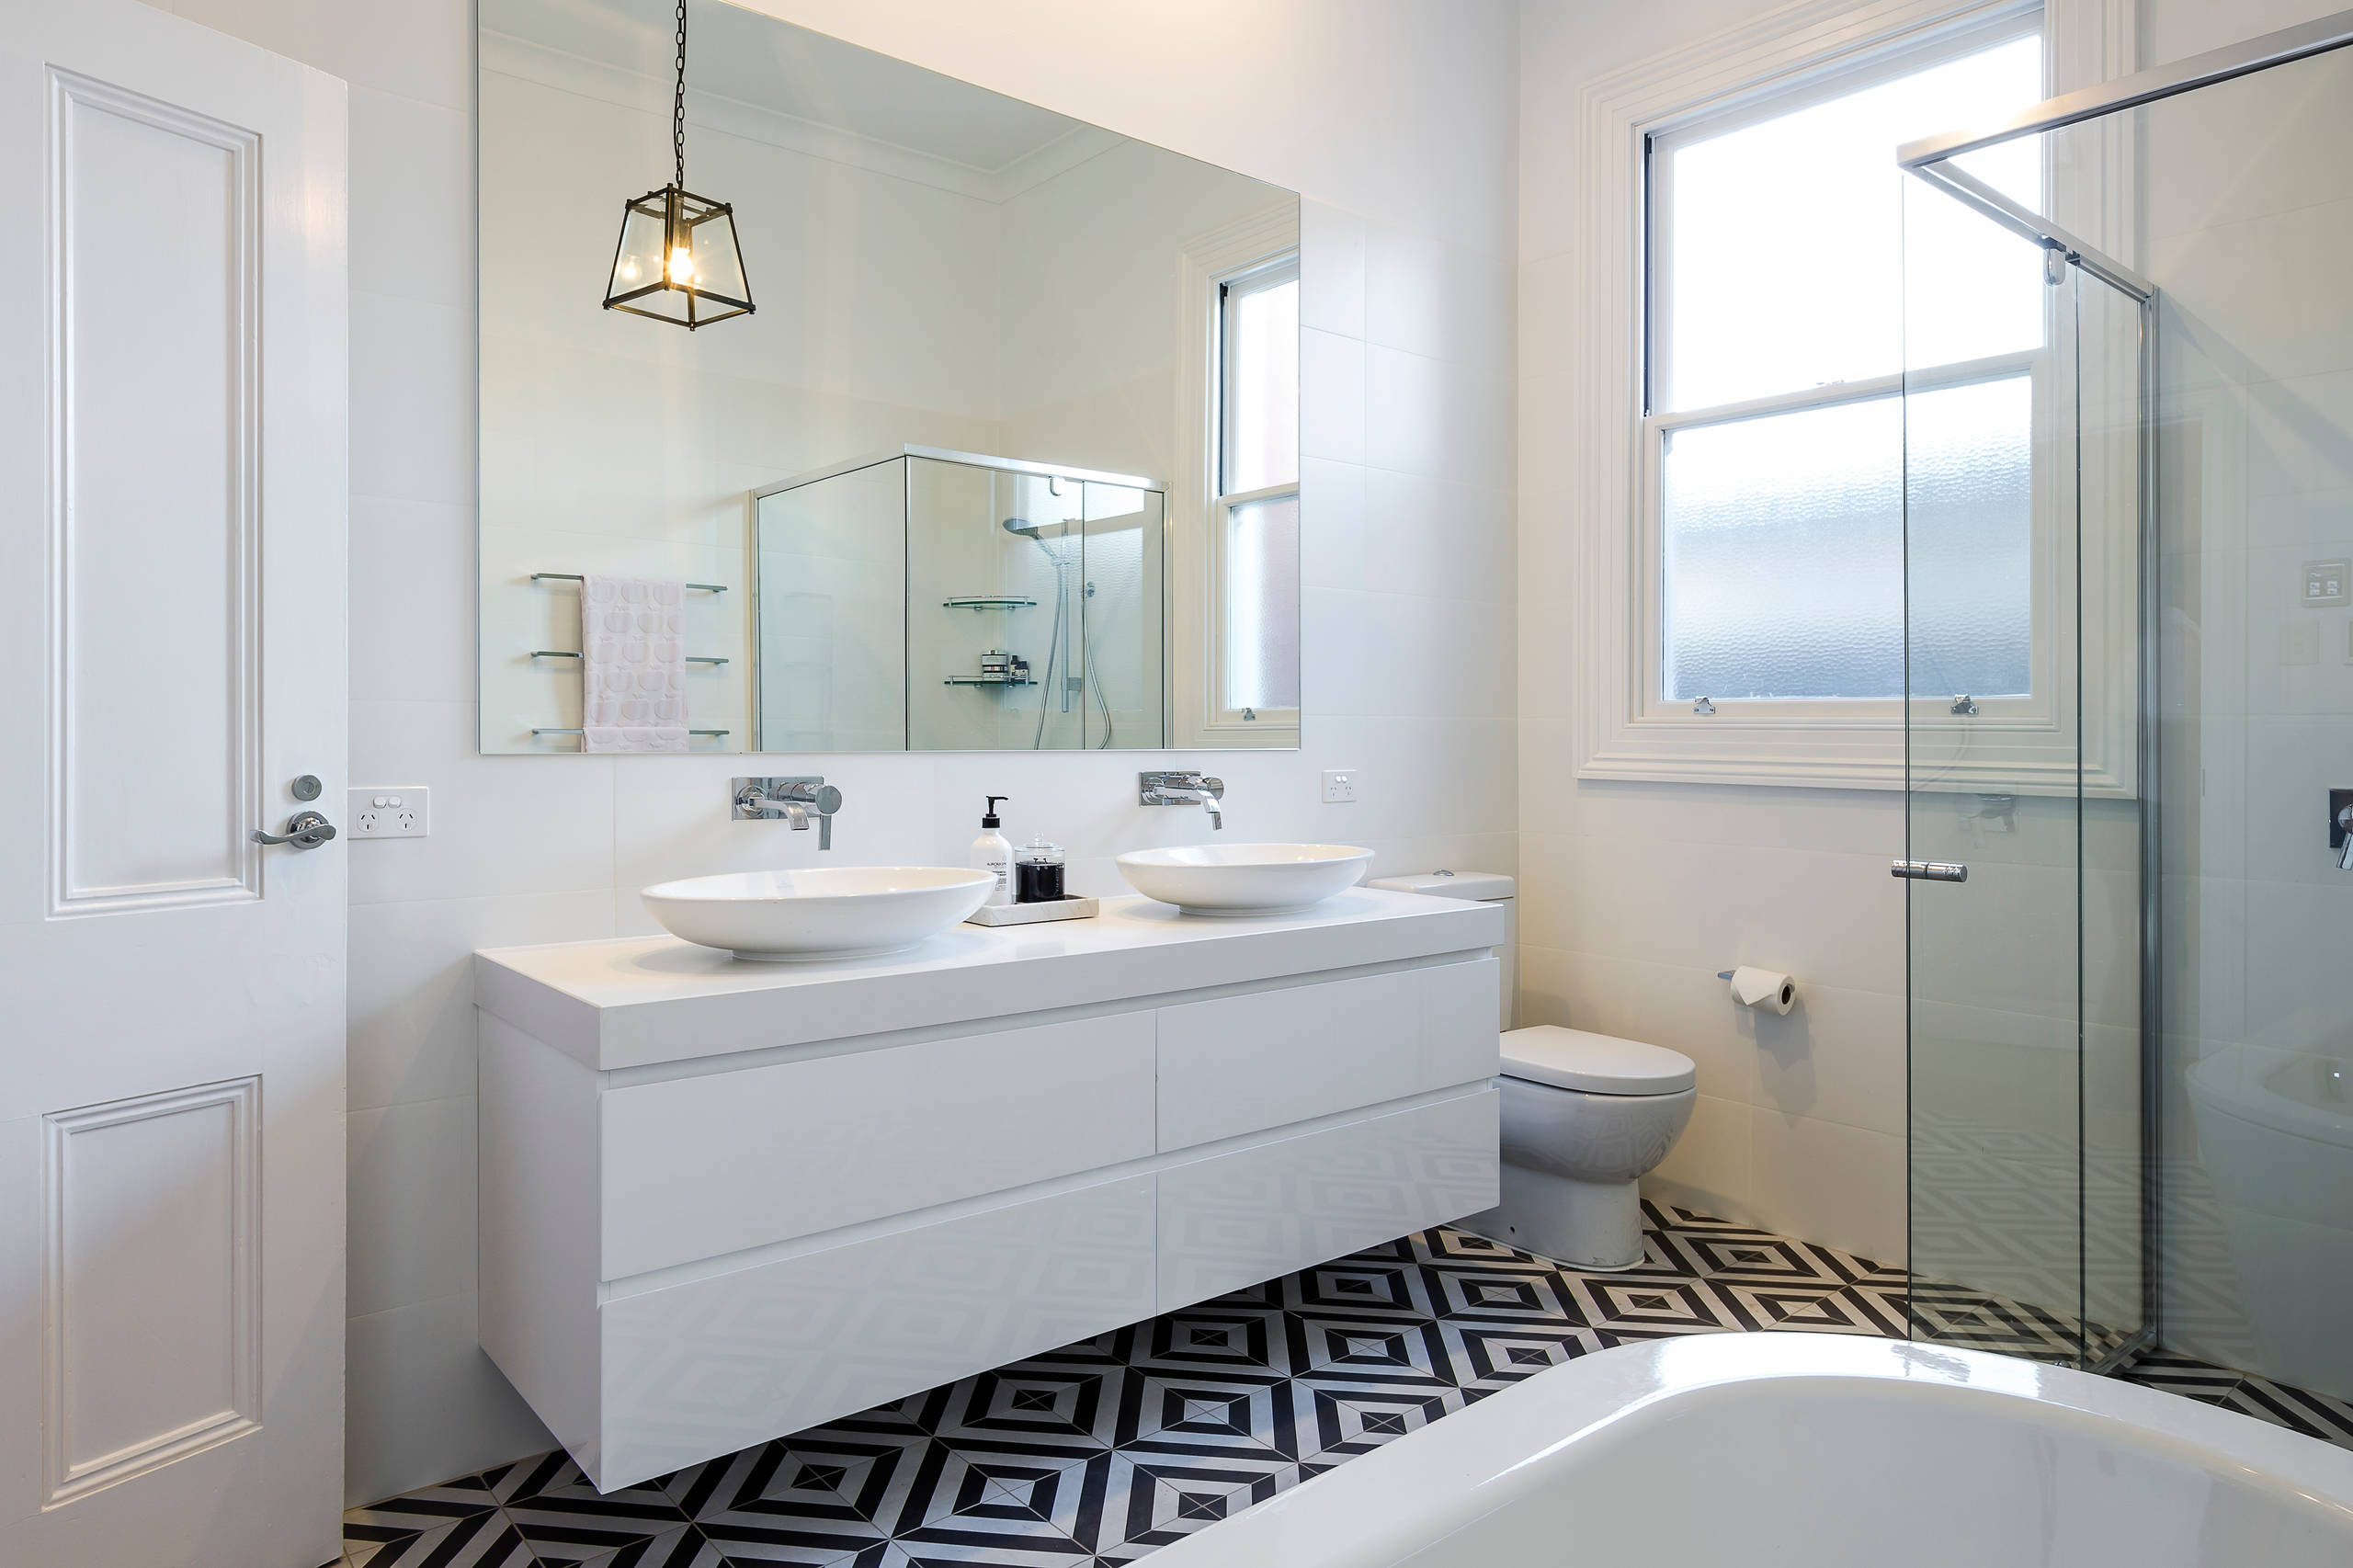 How To Choose A Bathroom Mirror Houzz Uk, How Wide Should Mirror Be Over Double Vanity